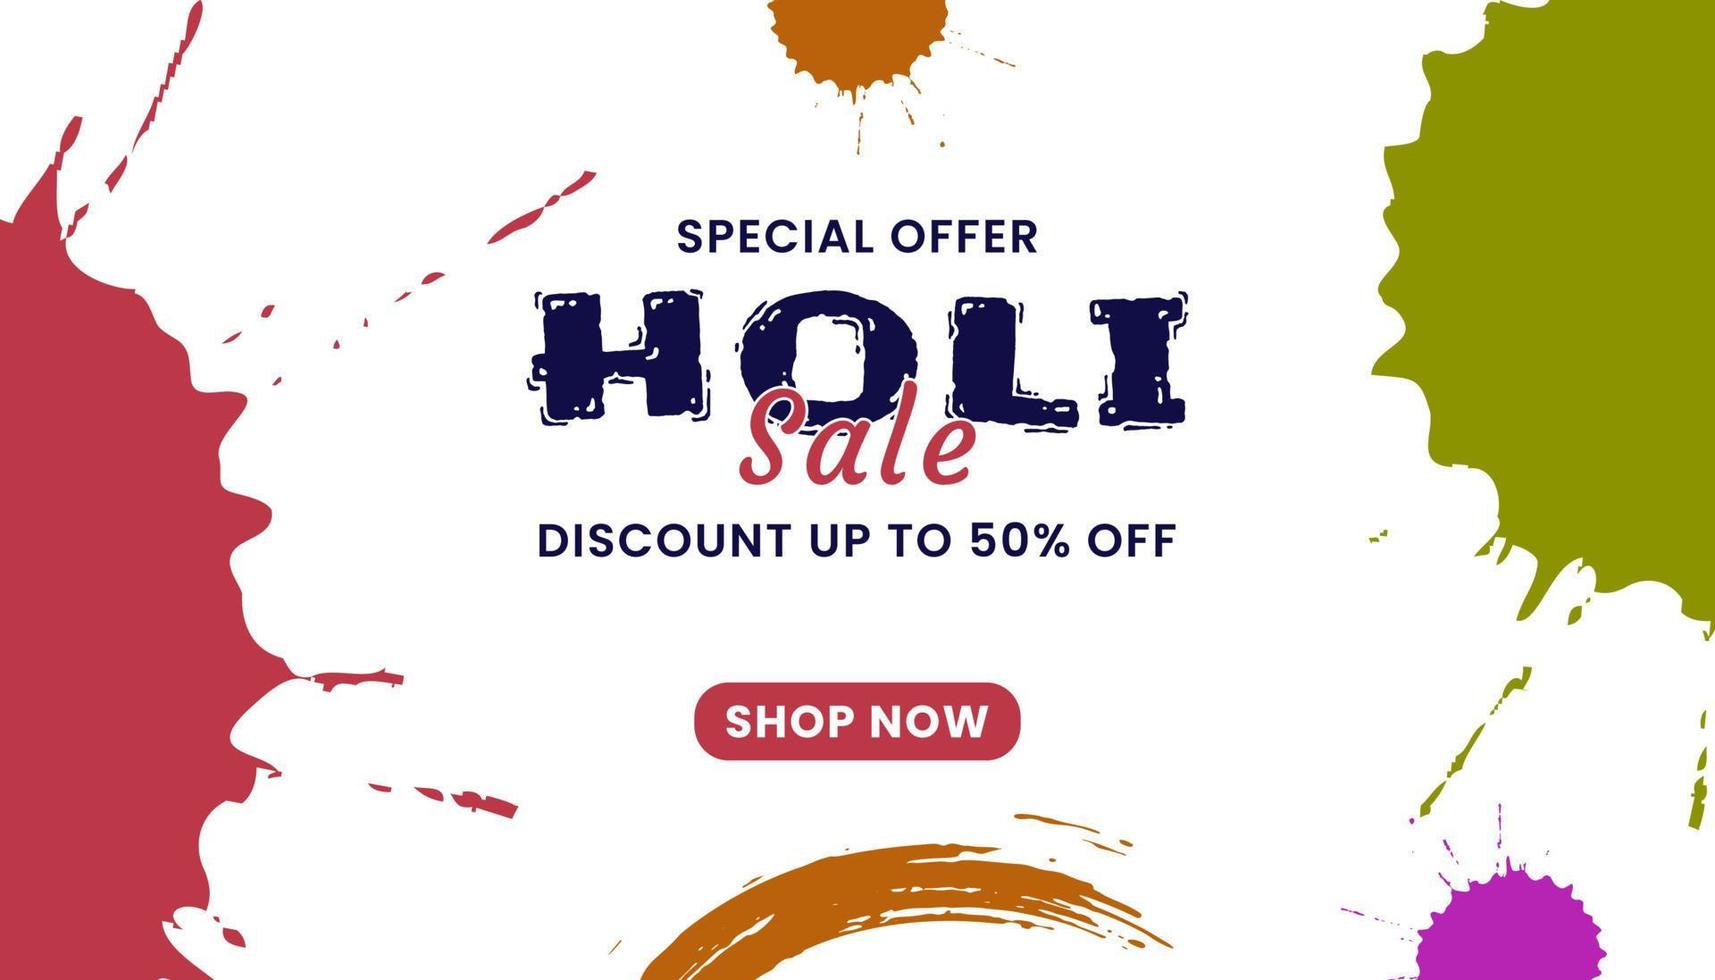 Happy Holi Festival Banner Sale and Promotion template for Festival of Colors celebration. vector